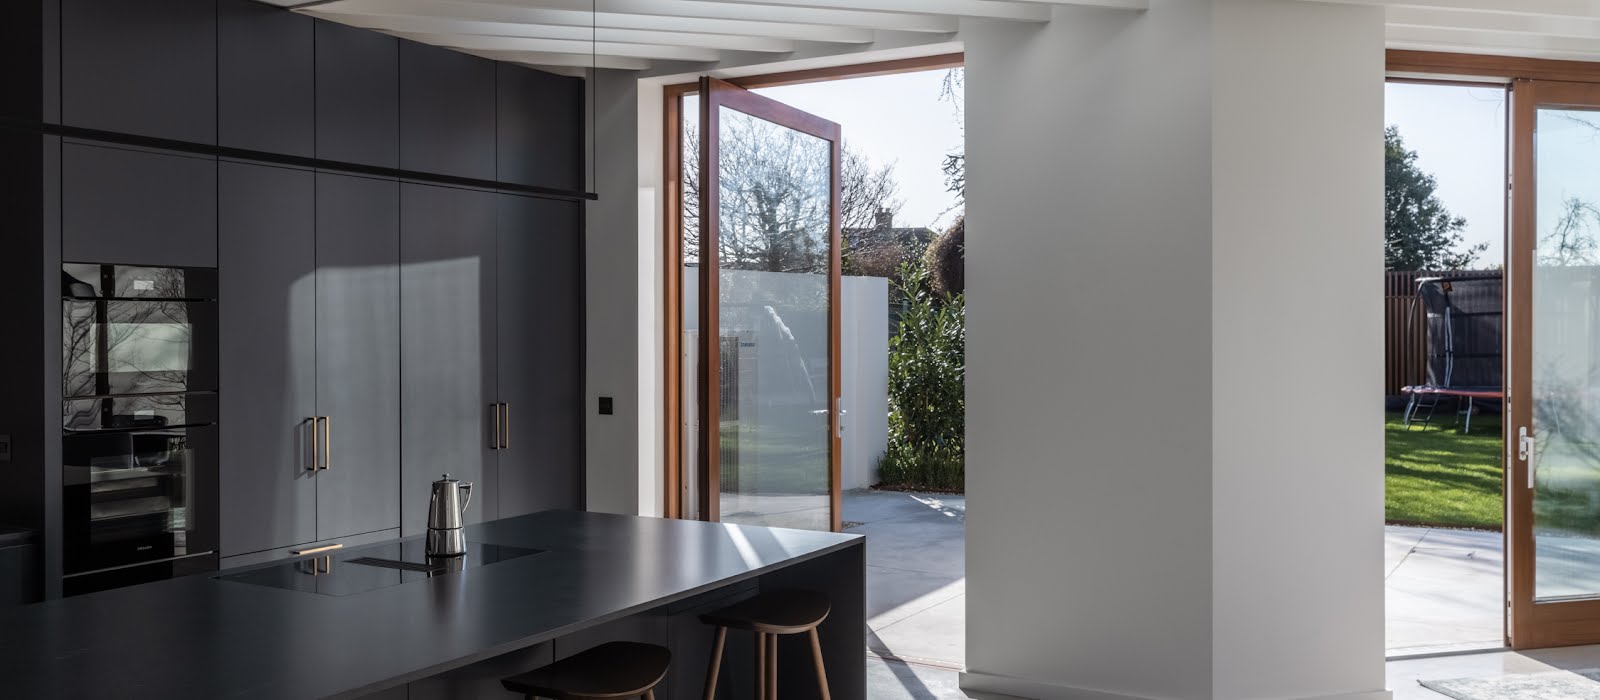 This Clontarf home was reconfigured to streamline the layout and maximise its views